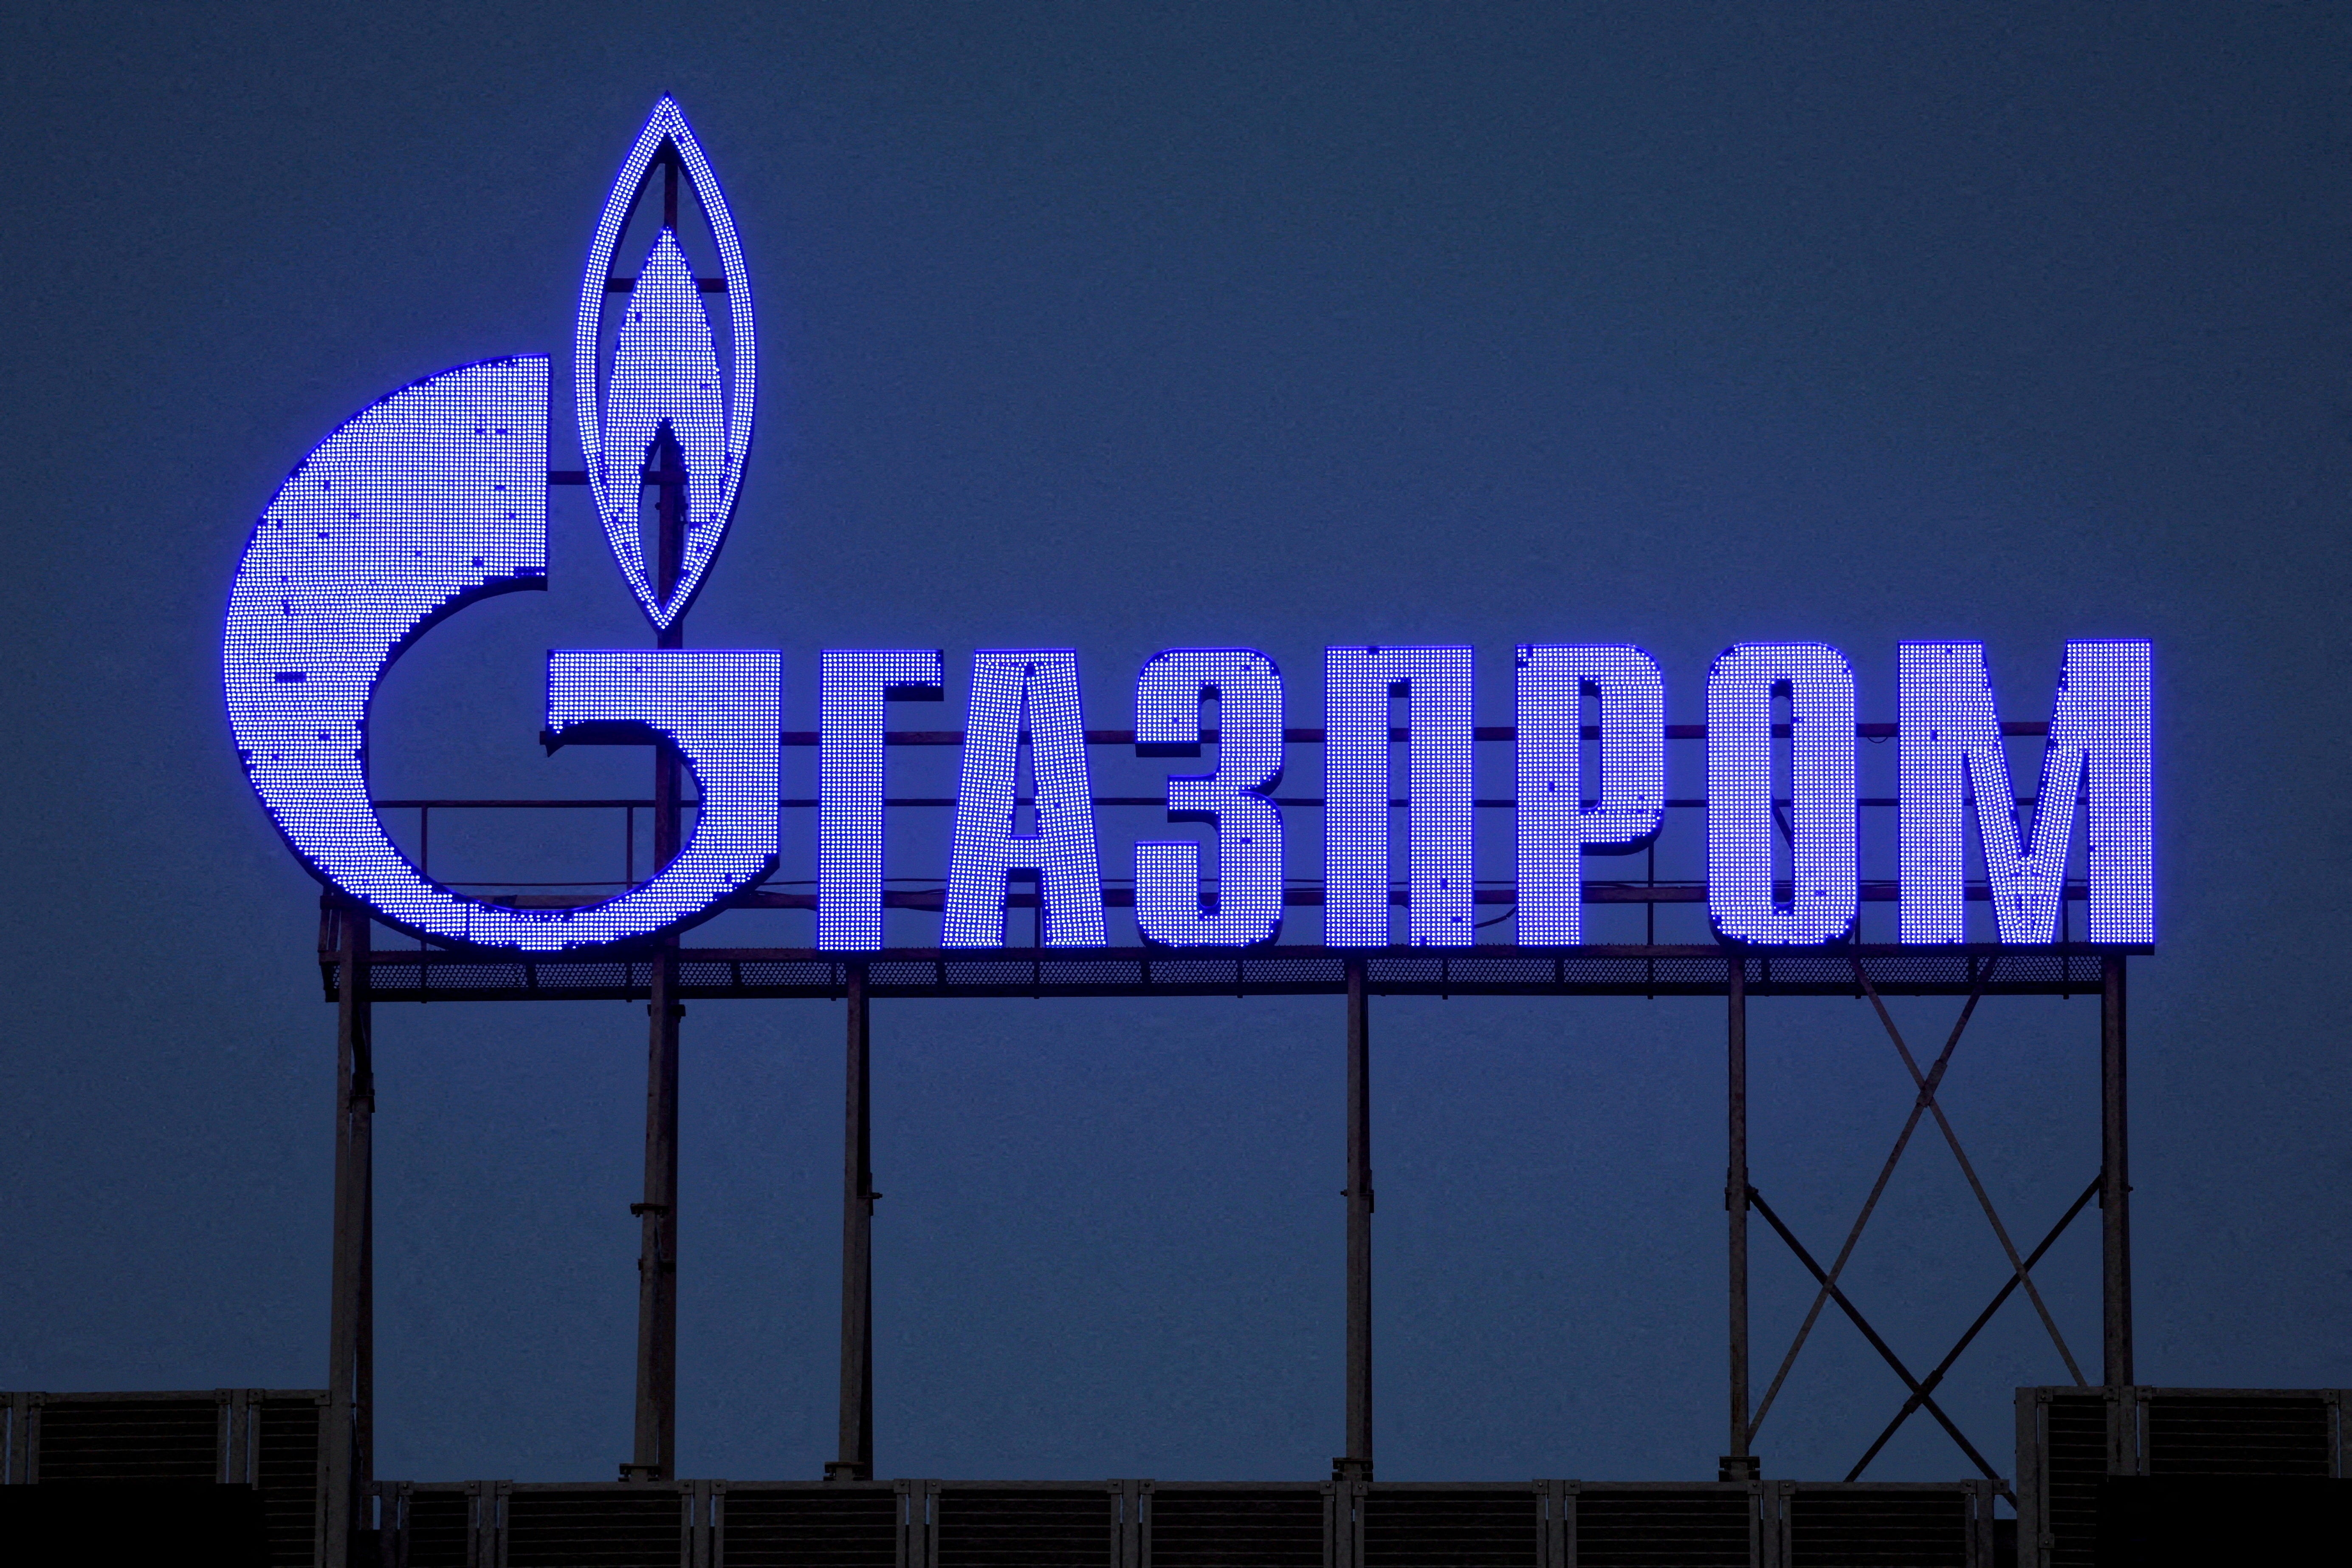 A number of senior executives connected to Gazprom have been found dead